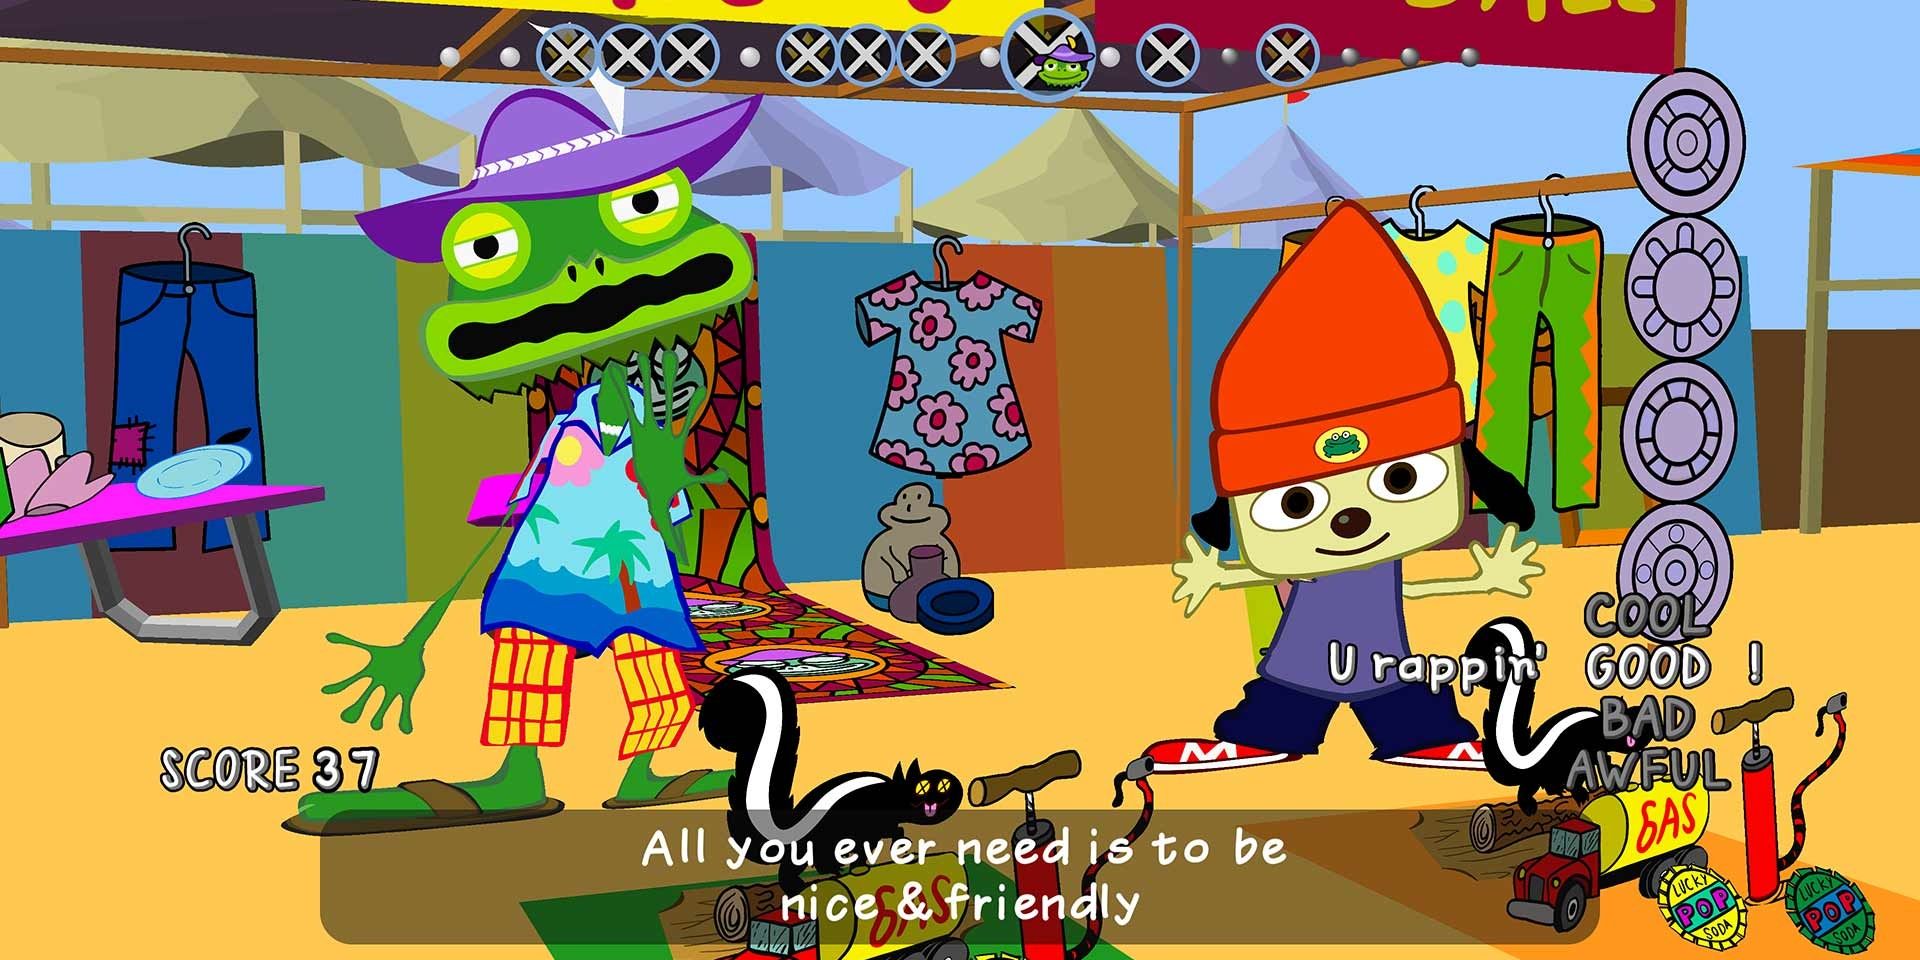 Parappa helps out Prince Fleaswallow.